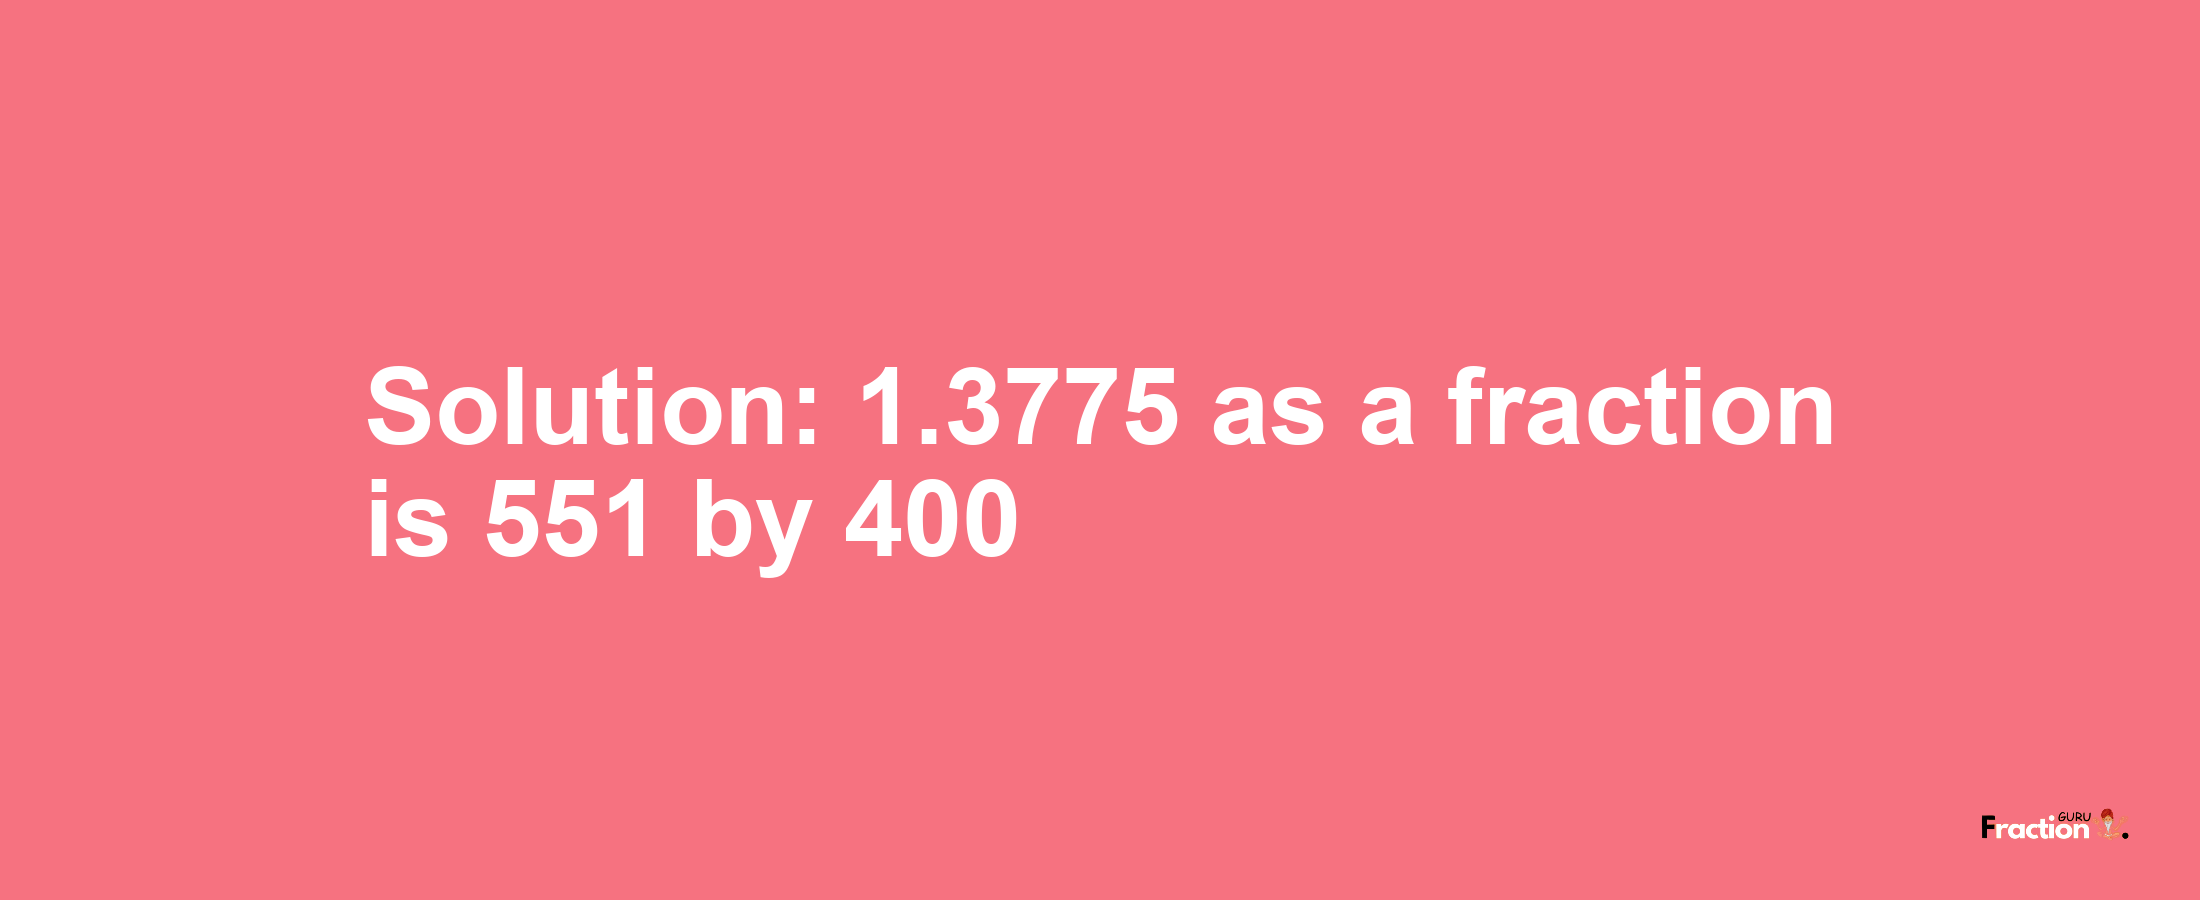 Solution:1.3775 as a fraction is 551/400